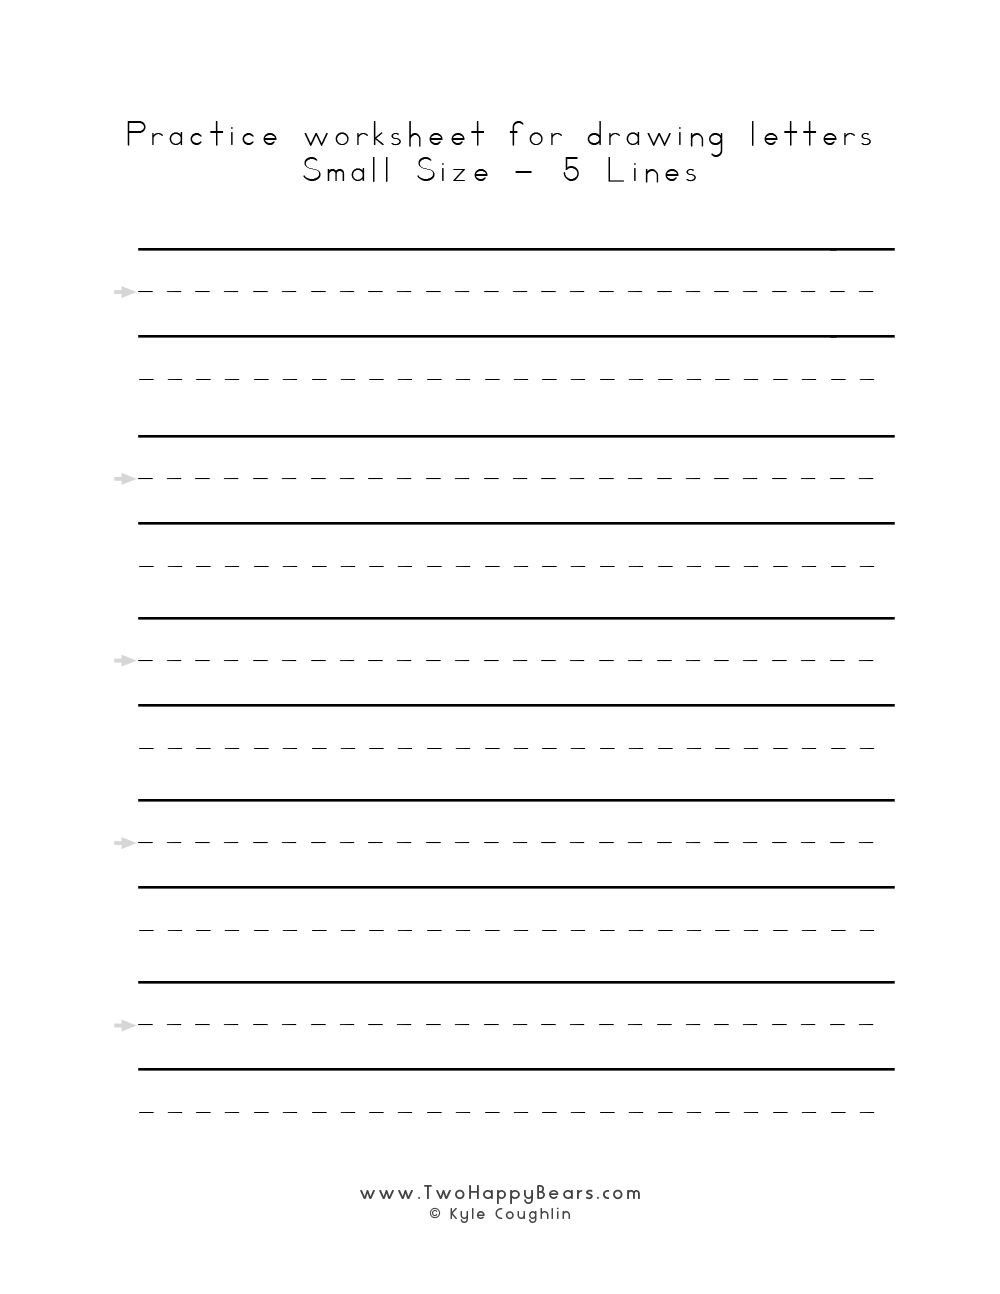 Small line blank worksheets for drawing letters